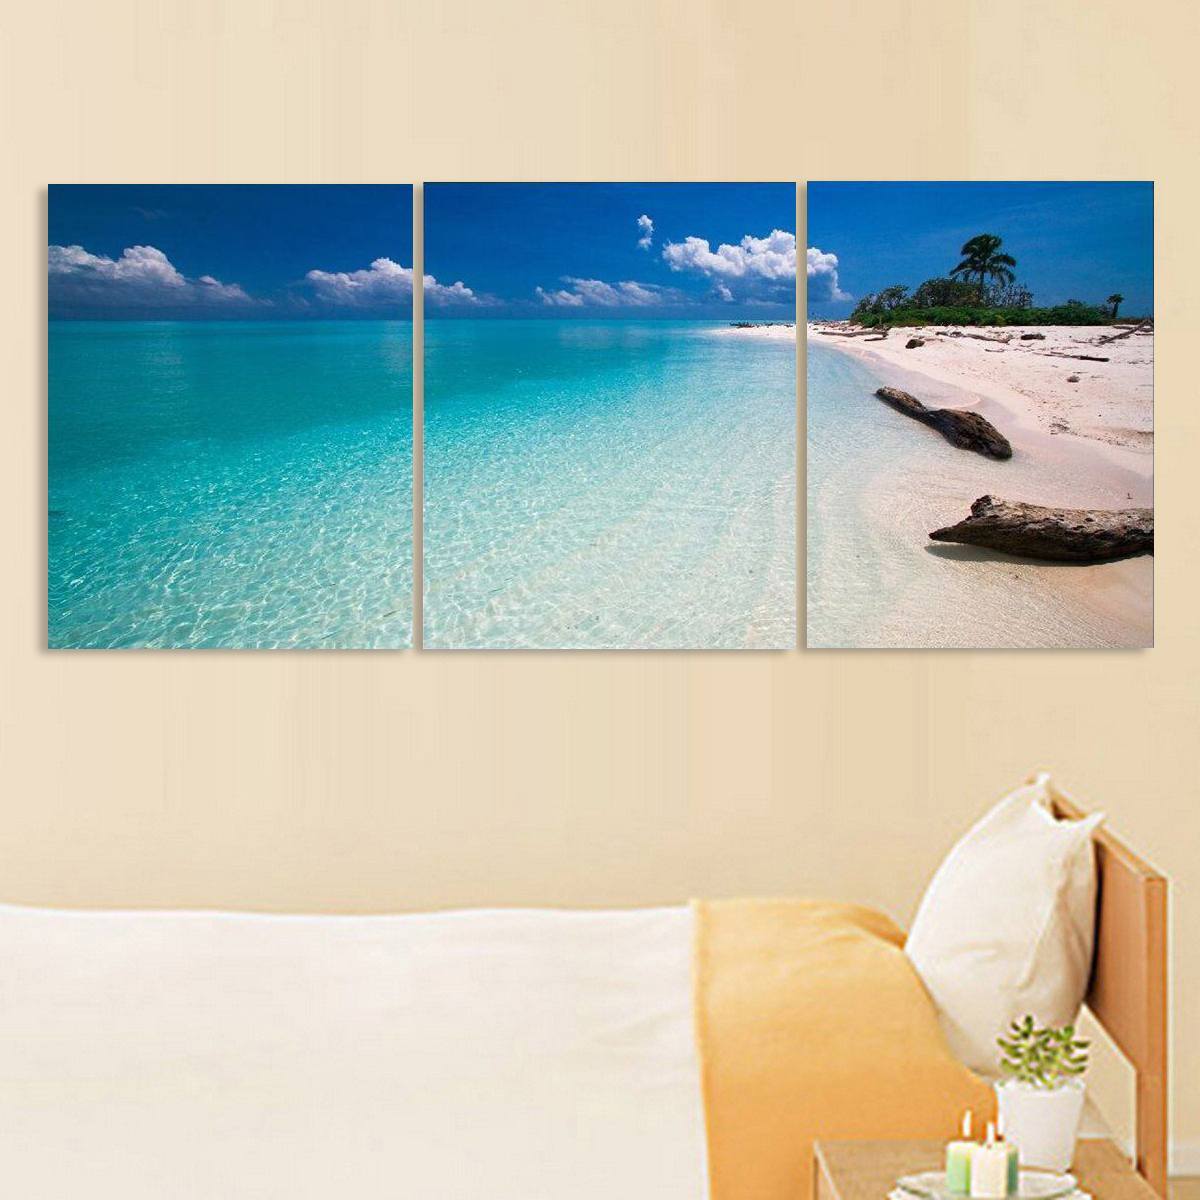 3Pcs-Canvas-Print-Paintings-Beach-Seaside-Wall-Decorative-Print-Art-Pictures-Frameless-Wall-Hanging--1159414-5